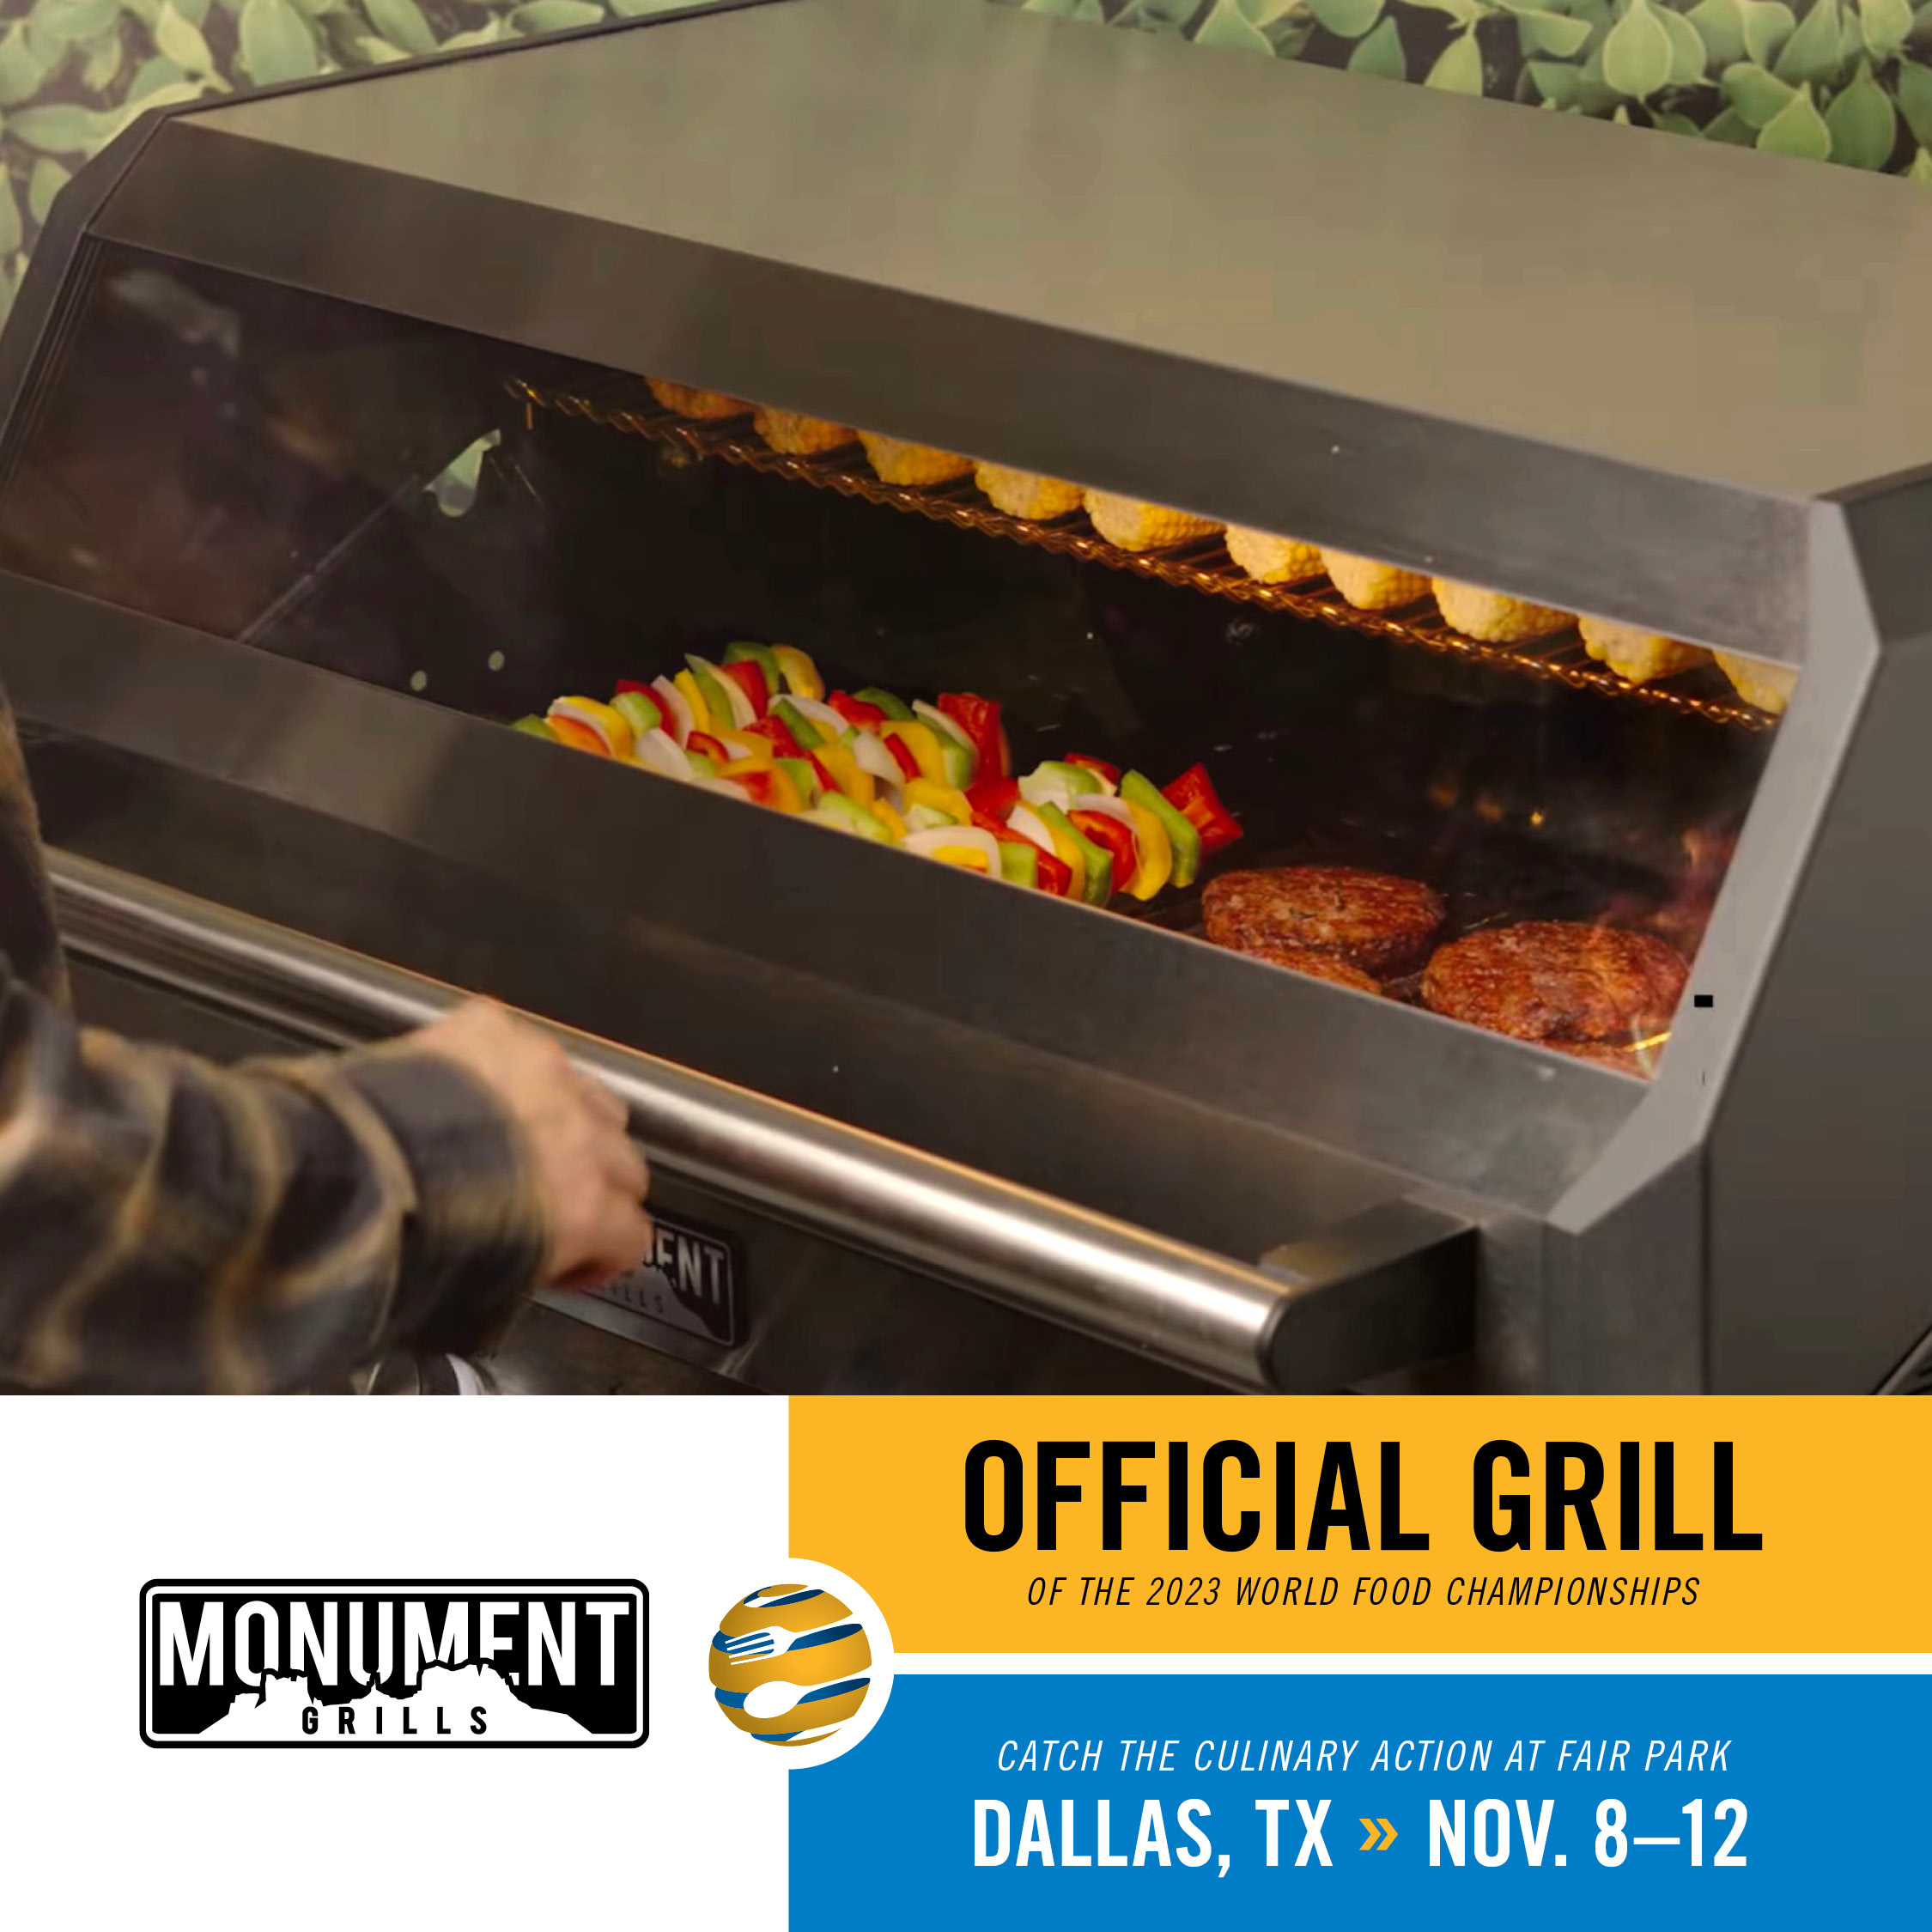 New Grill Brand Fuels Competitive Fire at World Food Championships